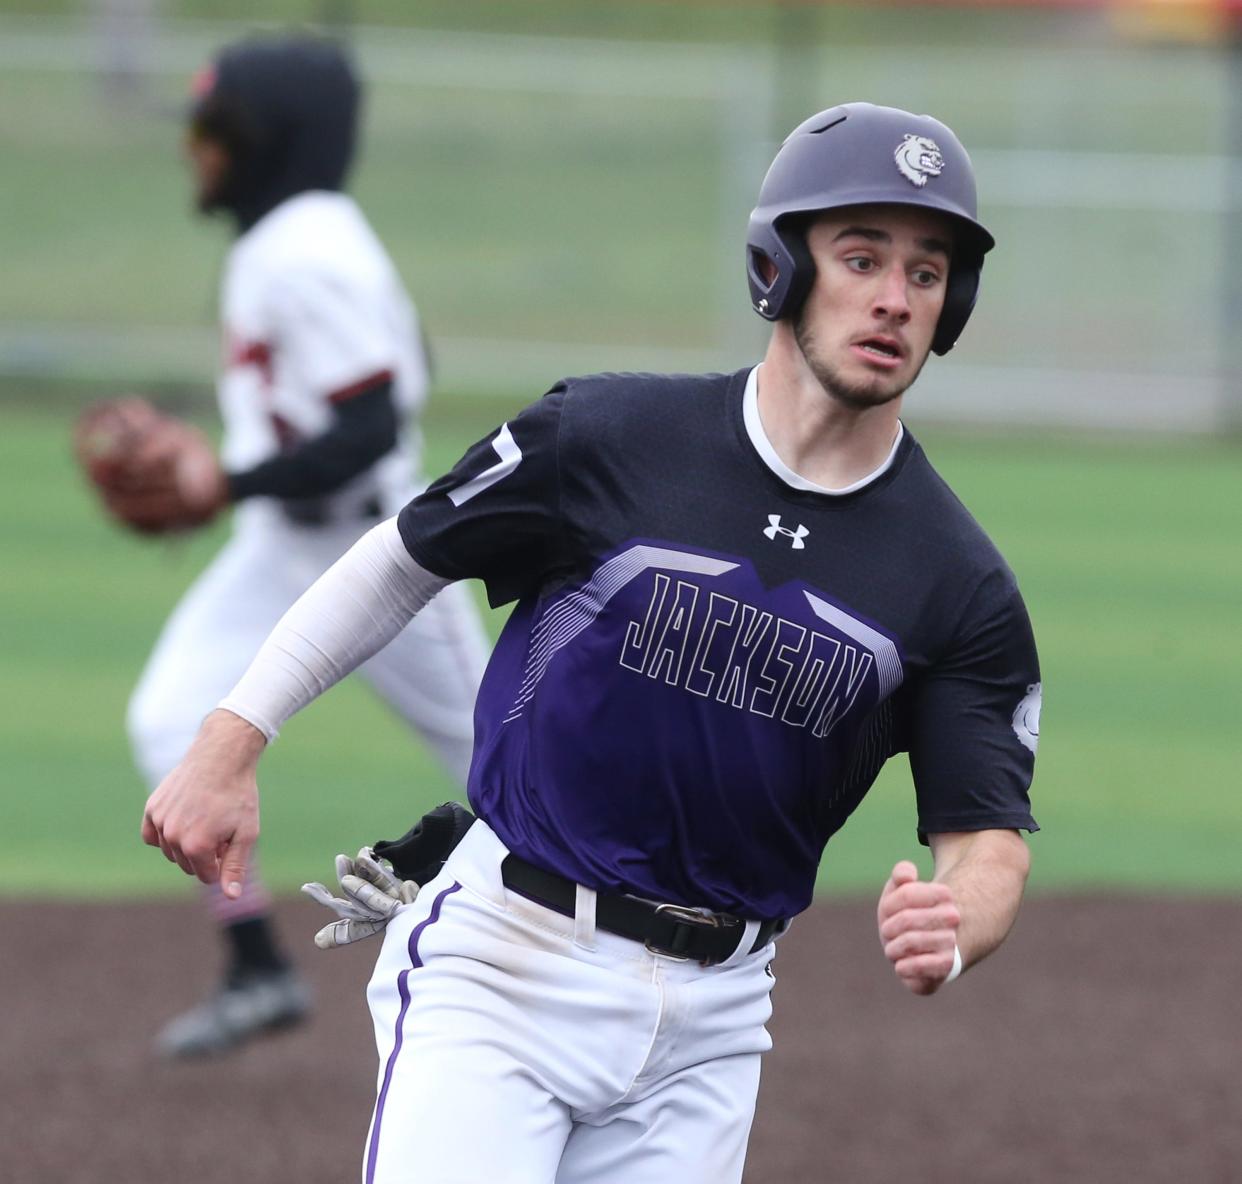 Garrett Wright of Jackson rounds third base on his way home to score during their game at McKinley on Tuesday, April 26, 2022.